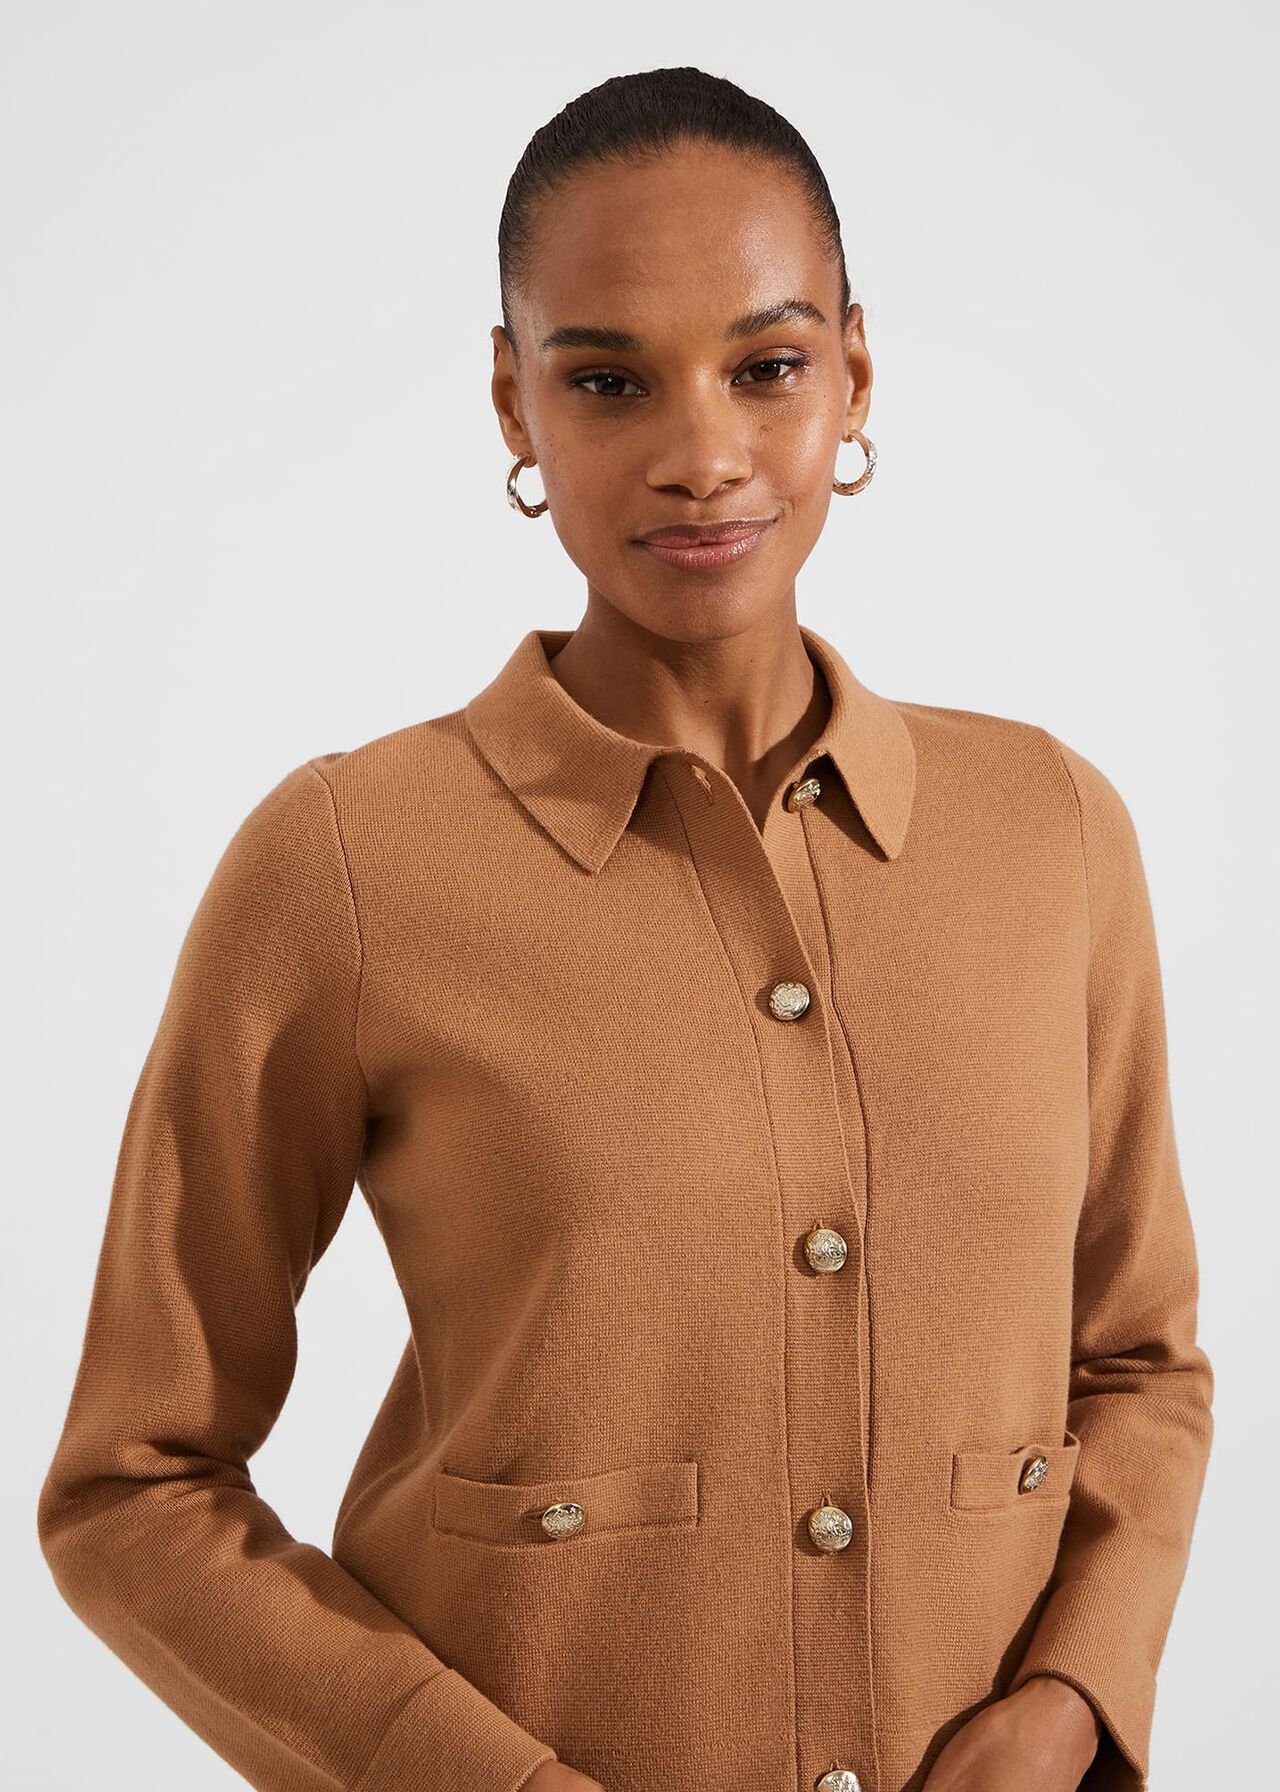 Mora Cotton Wool Knitted Jacket, Classic Camel, hi-res